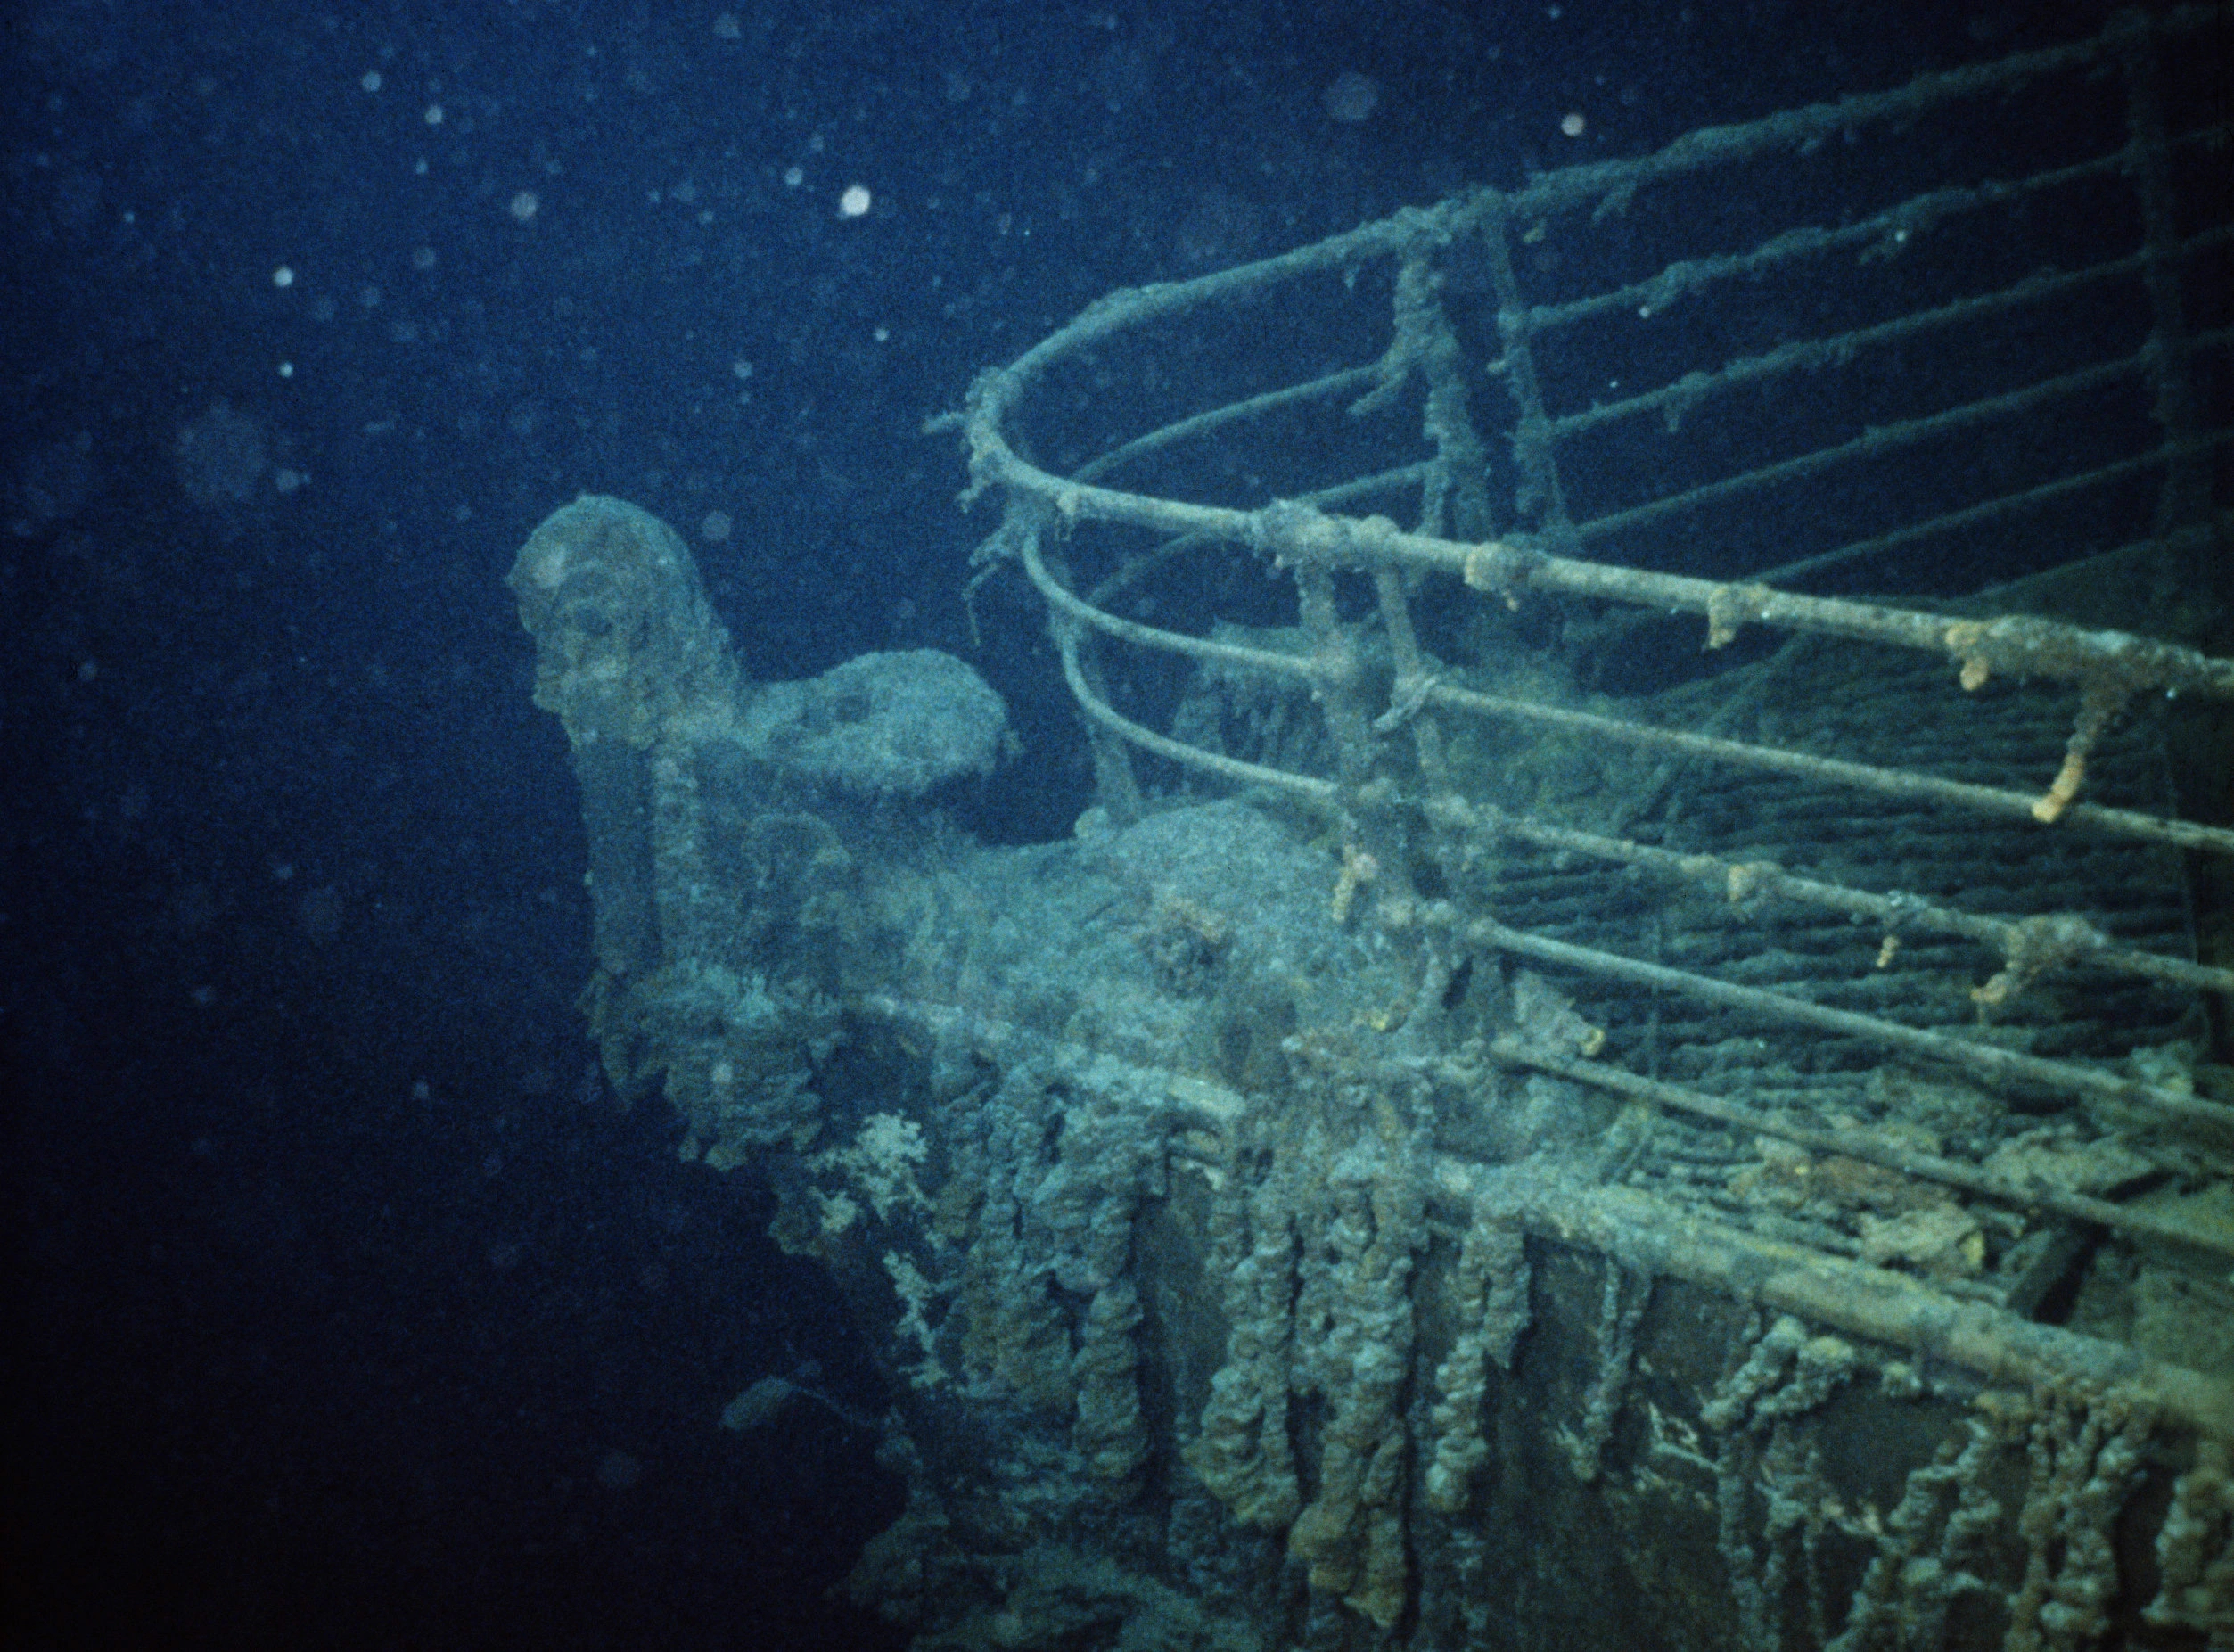 2506x1853 Titanic Shipwreck Photos: See Original Images from 1985 | Time